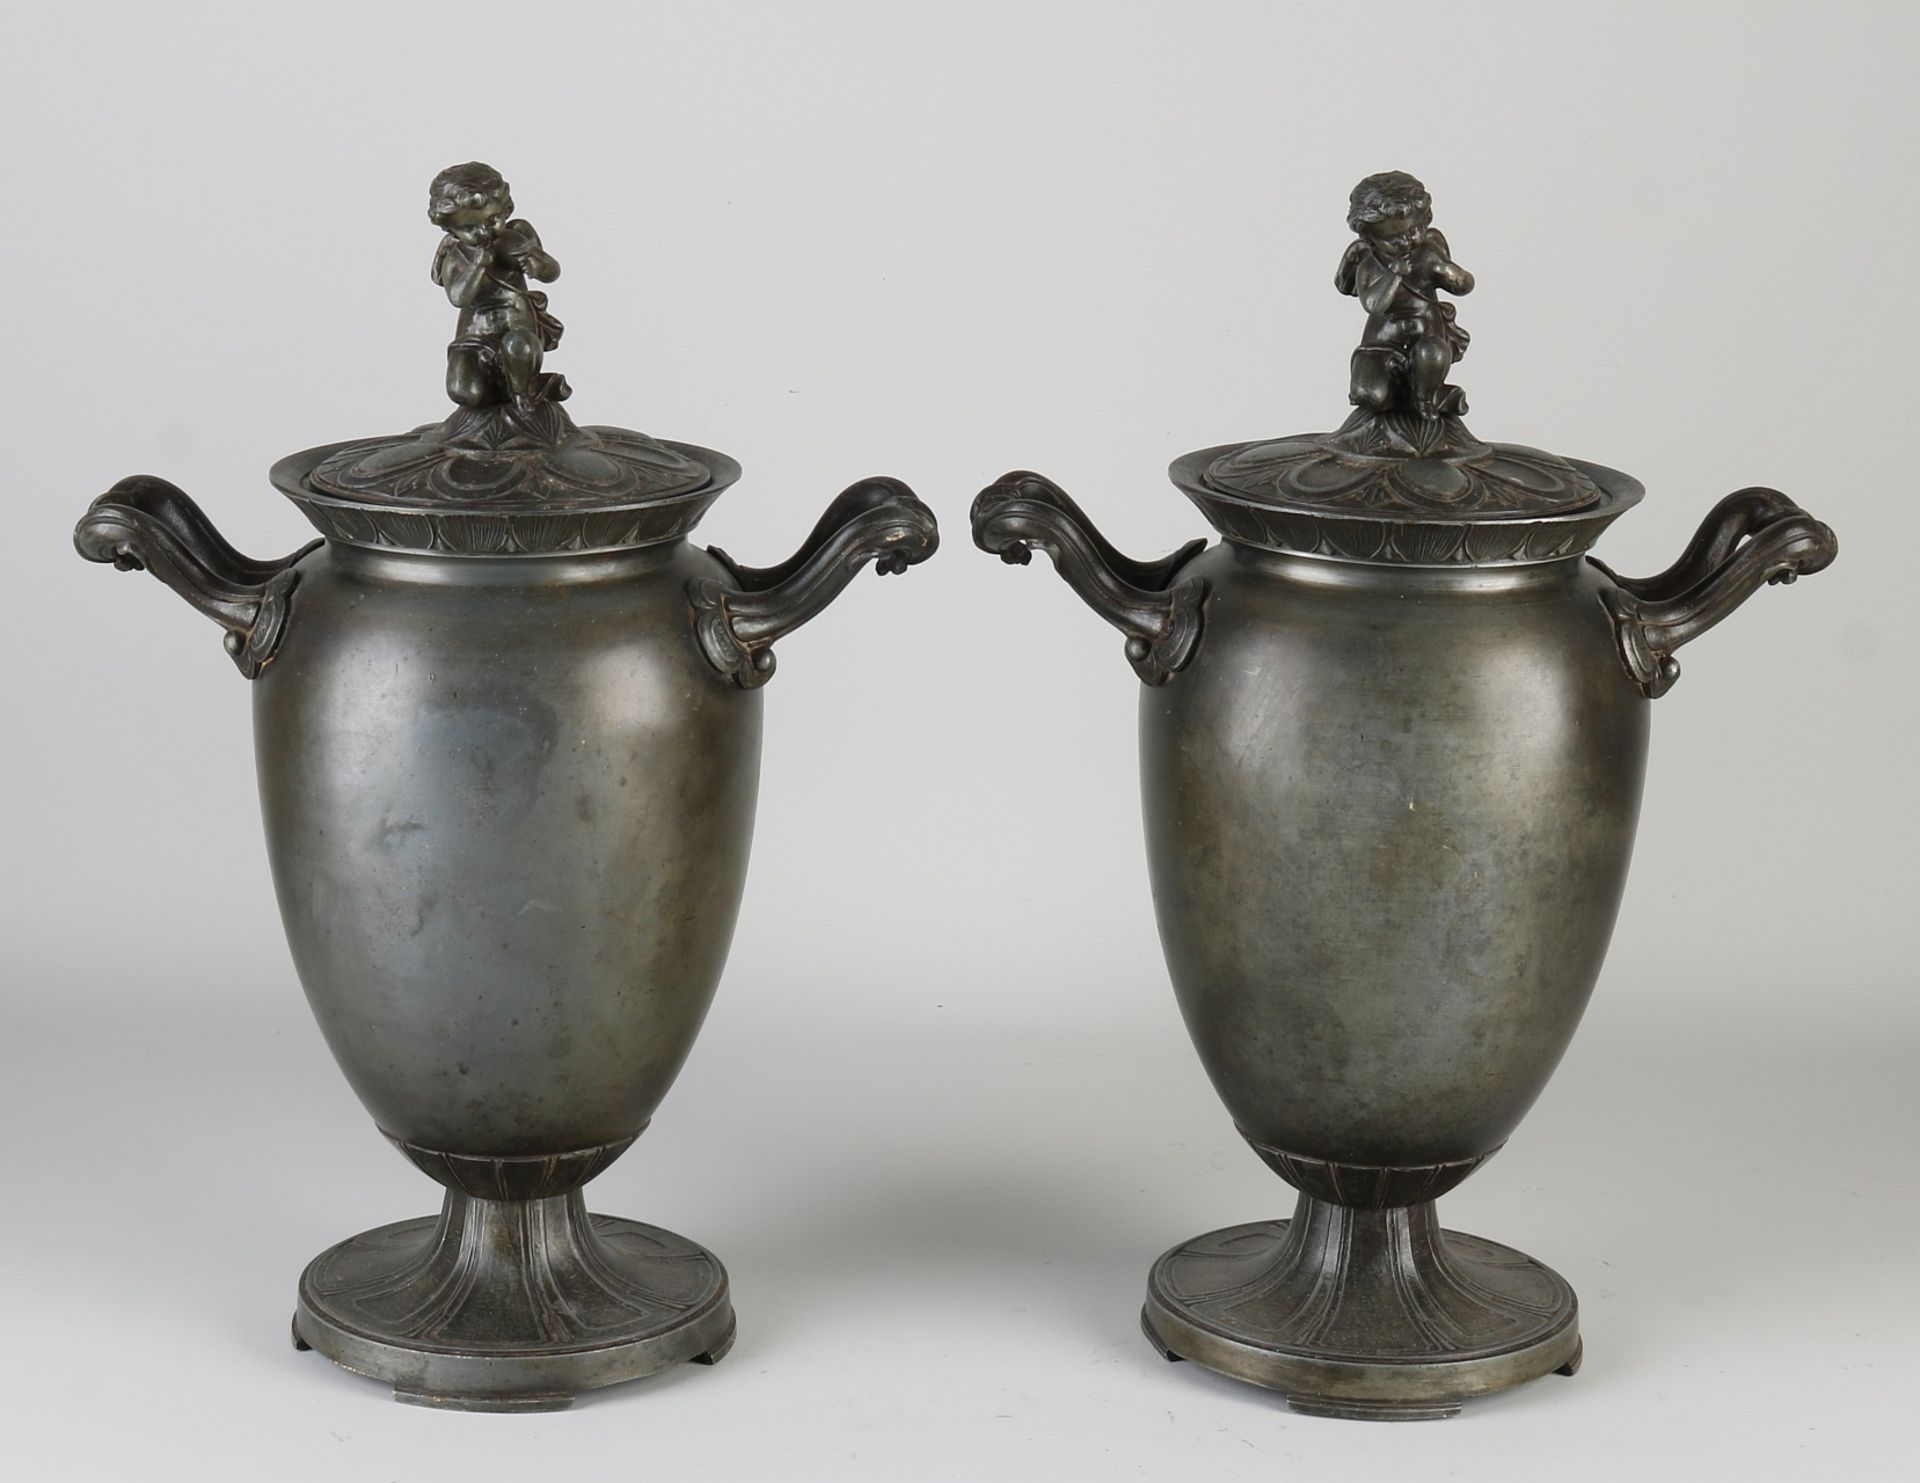 Two antique pewter jars